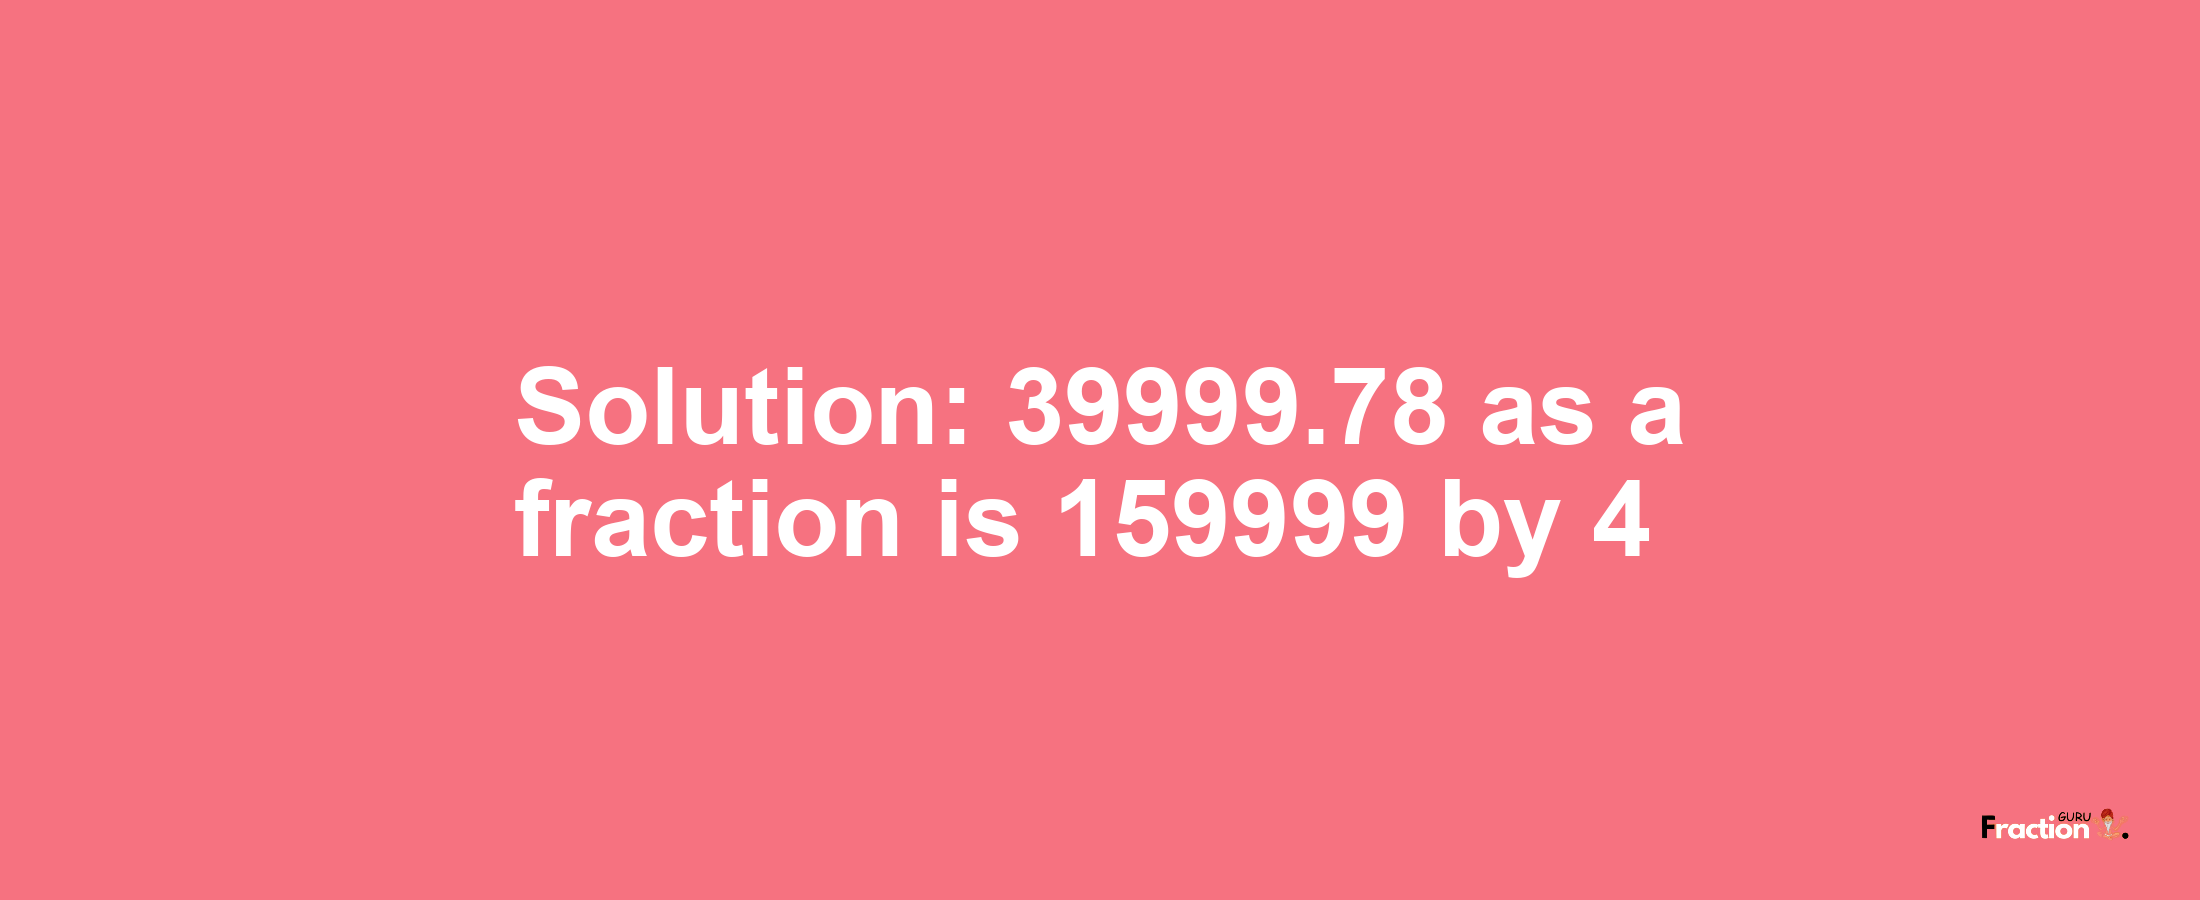 Solution:39999.78 as a fraction is 159999/4